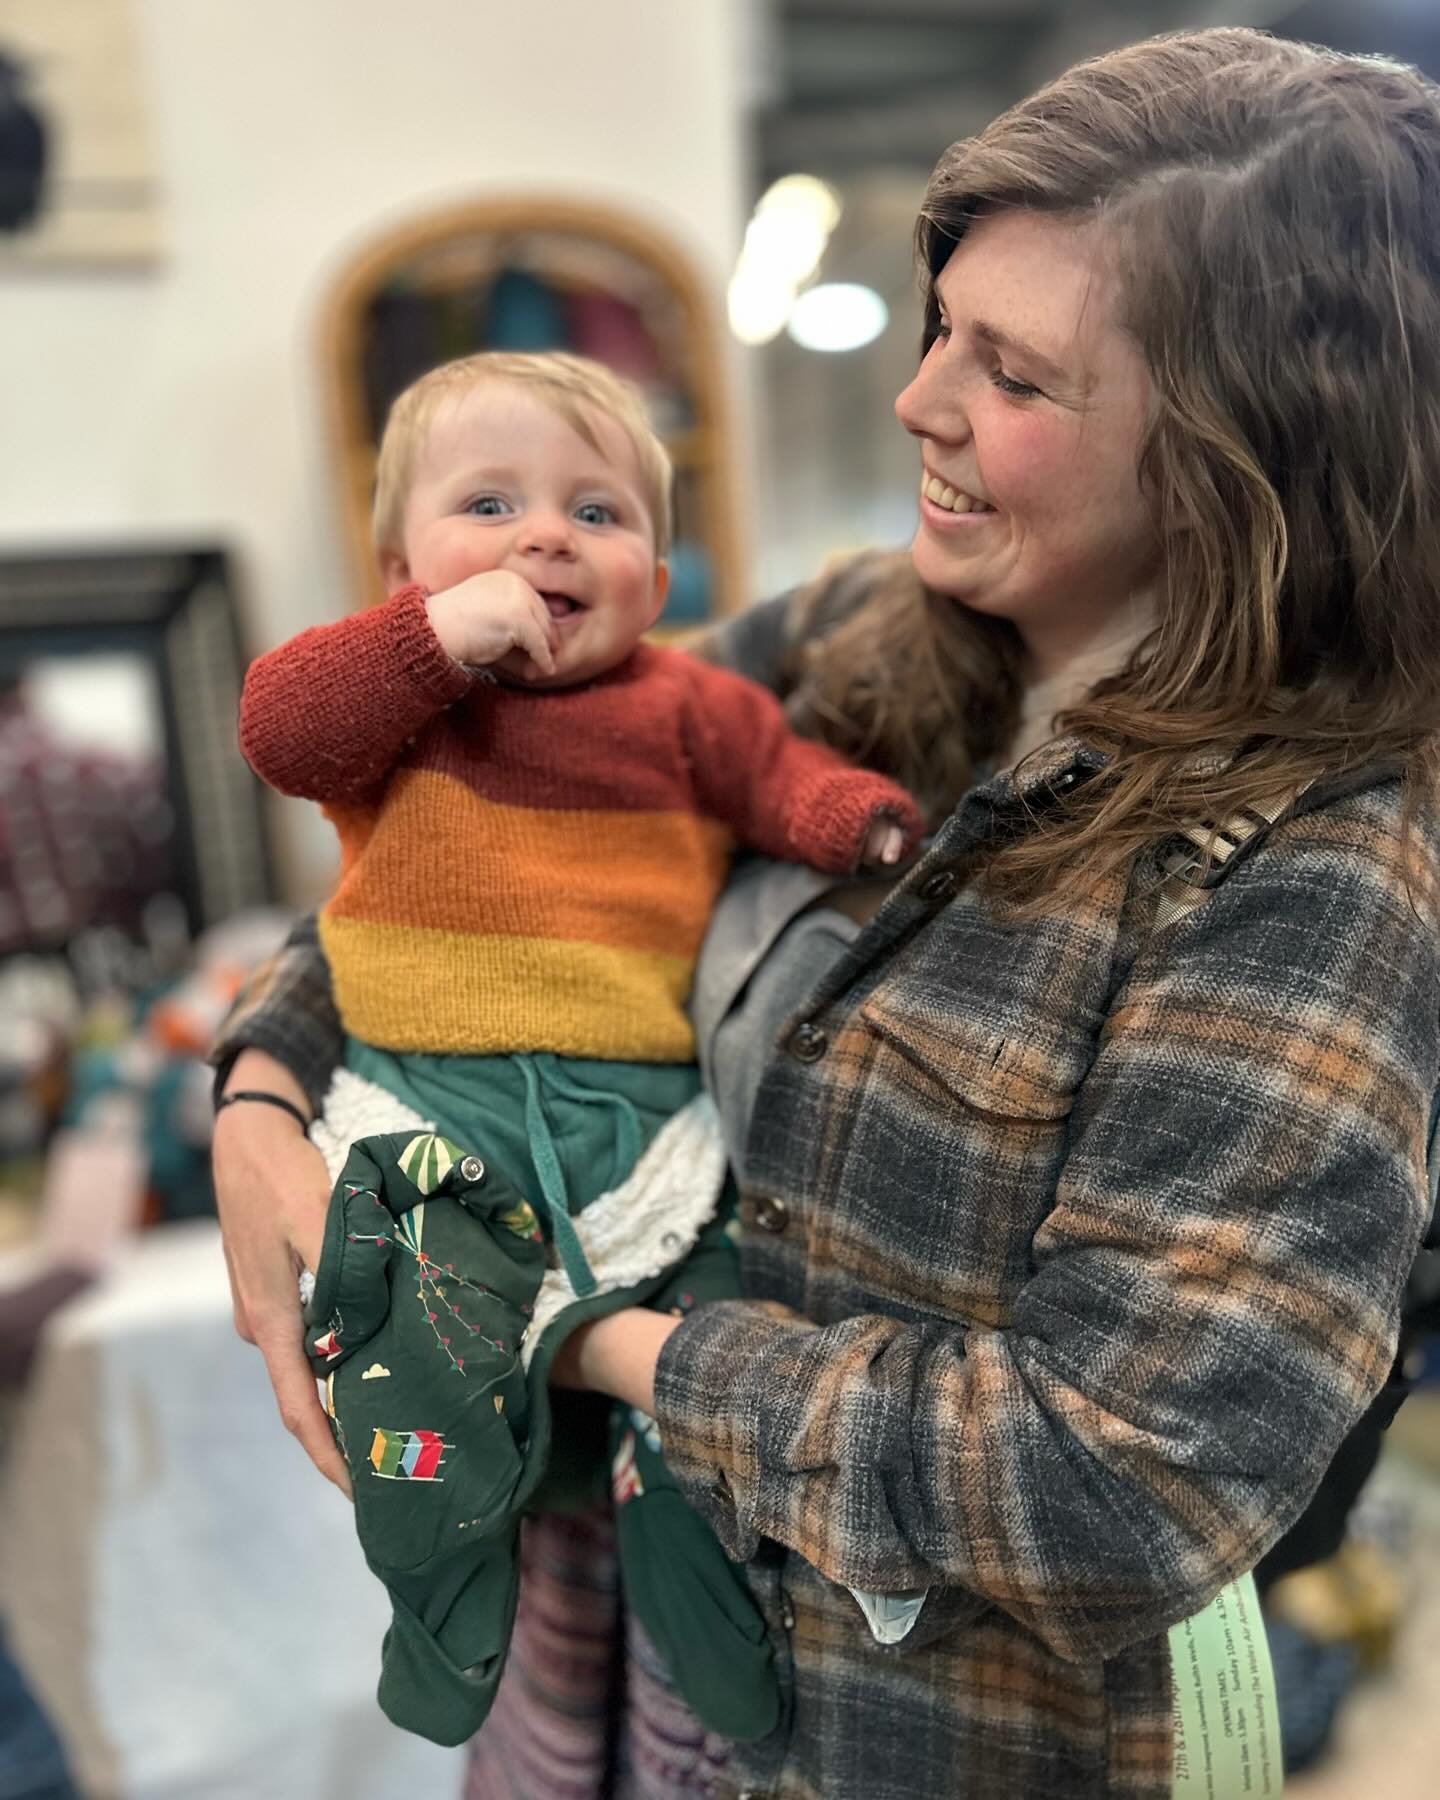 Fabulous first day at Wonderwool 🌟

Met so many people new and old. 

Lovely to see our wool wondering around the show in the form of hats and jumpers etc. 

So great to see this little man in a striped Cambrian wool jumper. The lady with the hat wa